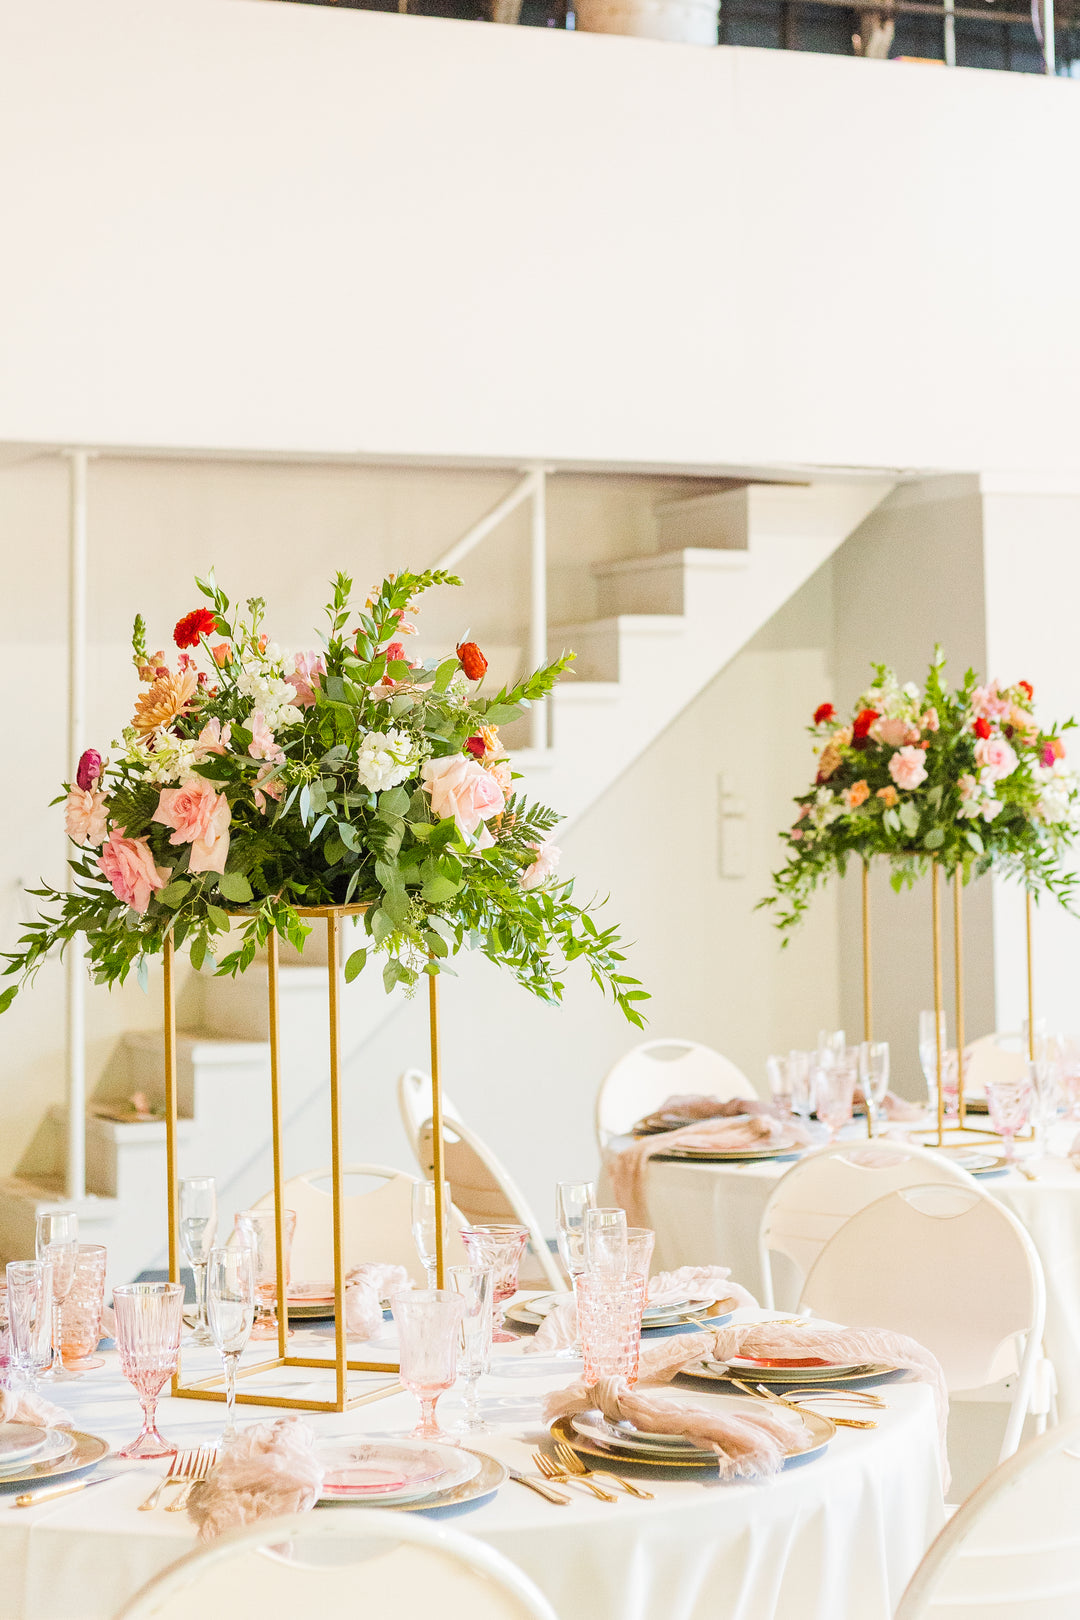 Top Bridal Shower Themes for a Memorable Celebration